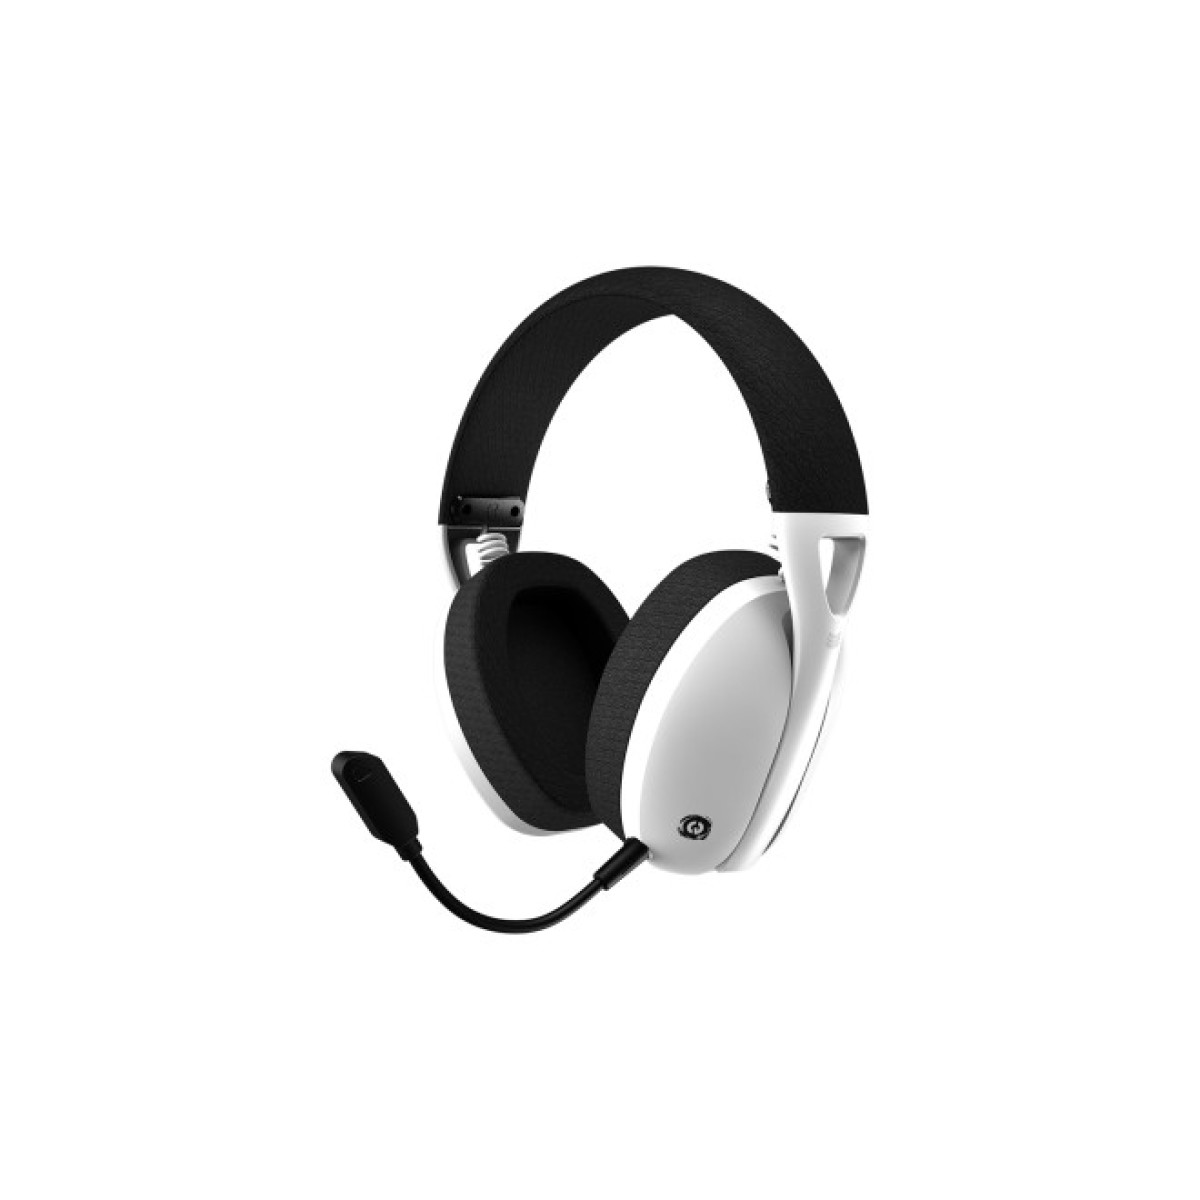 Навушники Canyon GH-13 Ego Wireless Gaming 7.1 White (CND-SGHS13W) 256_256.jpg